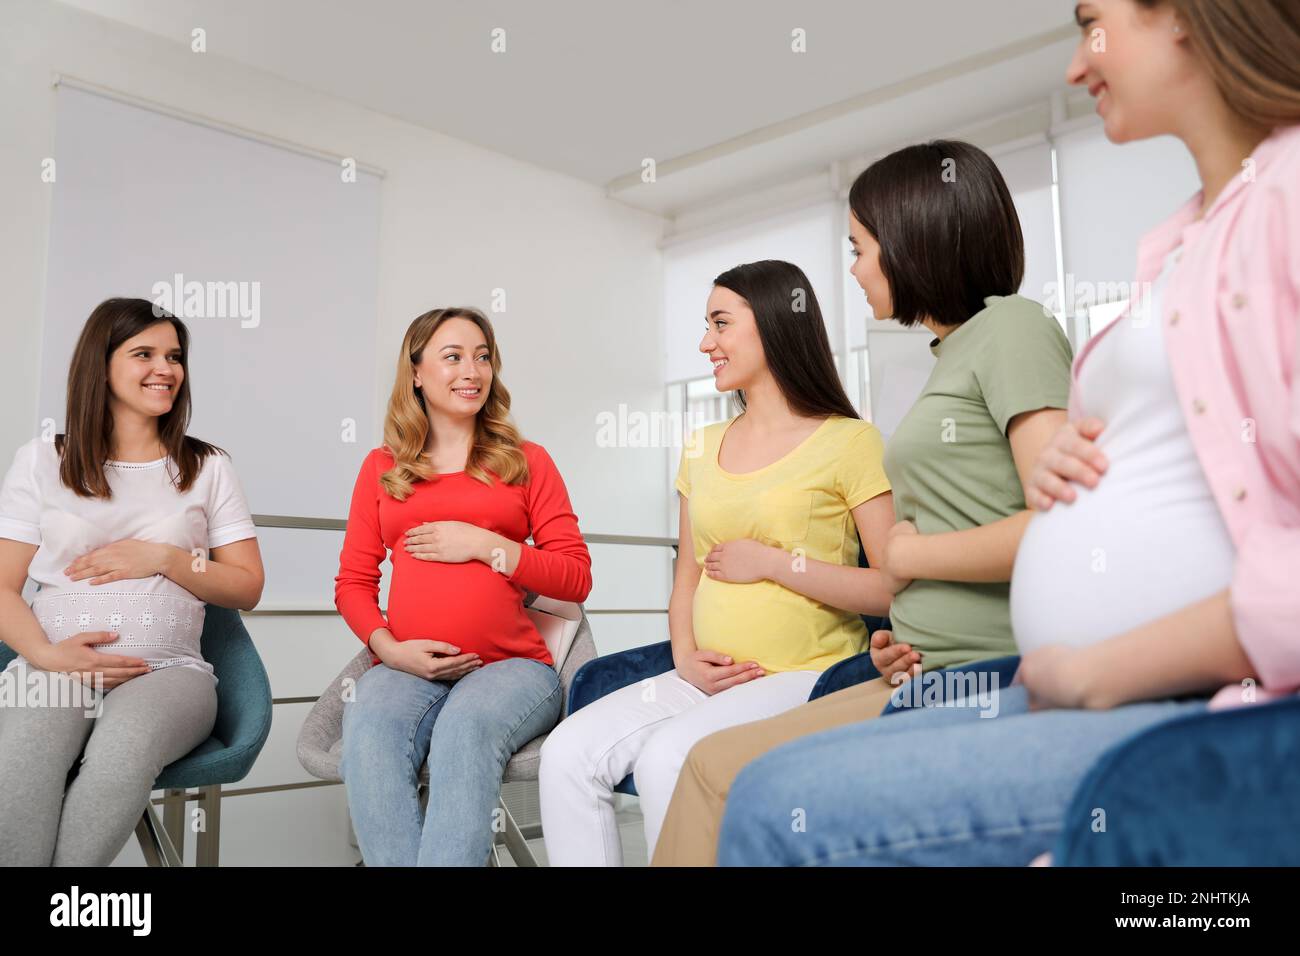 https://c8.alamy.com/comp/2NHTKJA/group-of-pregnant-women-at-courses-for-expectant-mothers-indoors-2NHTKJA.jpg